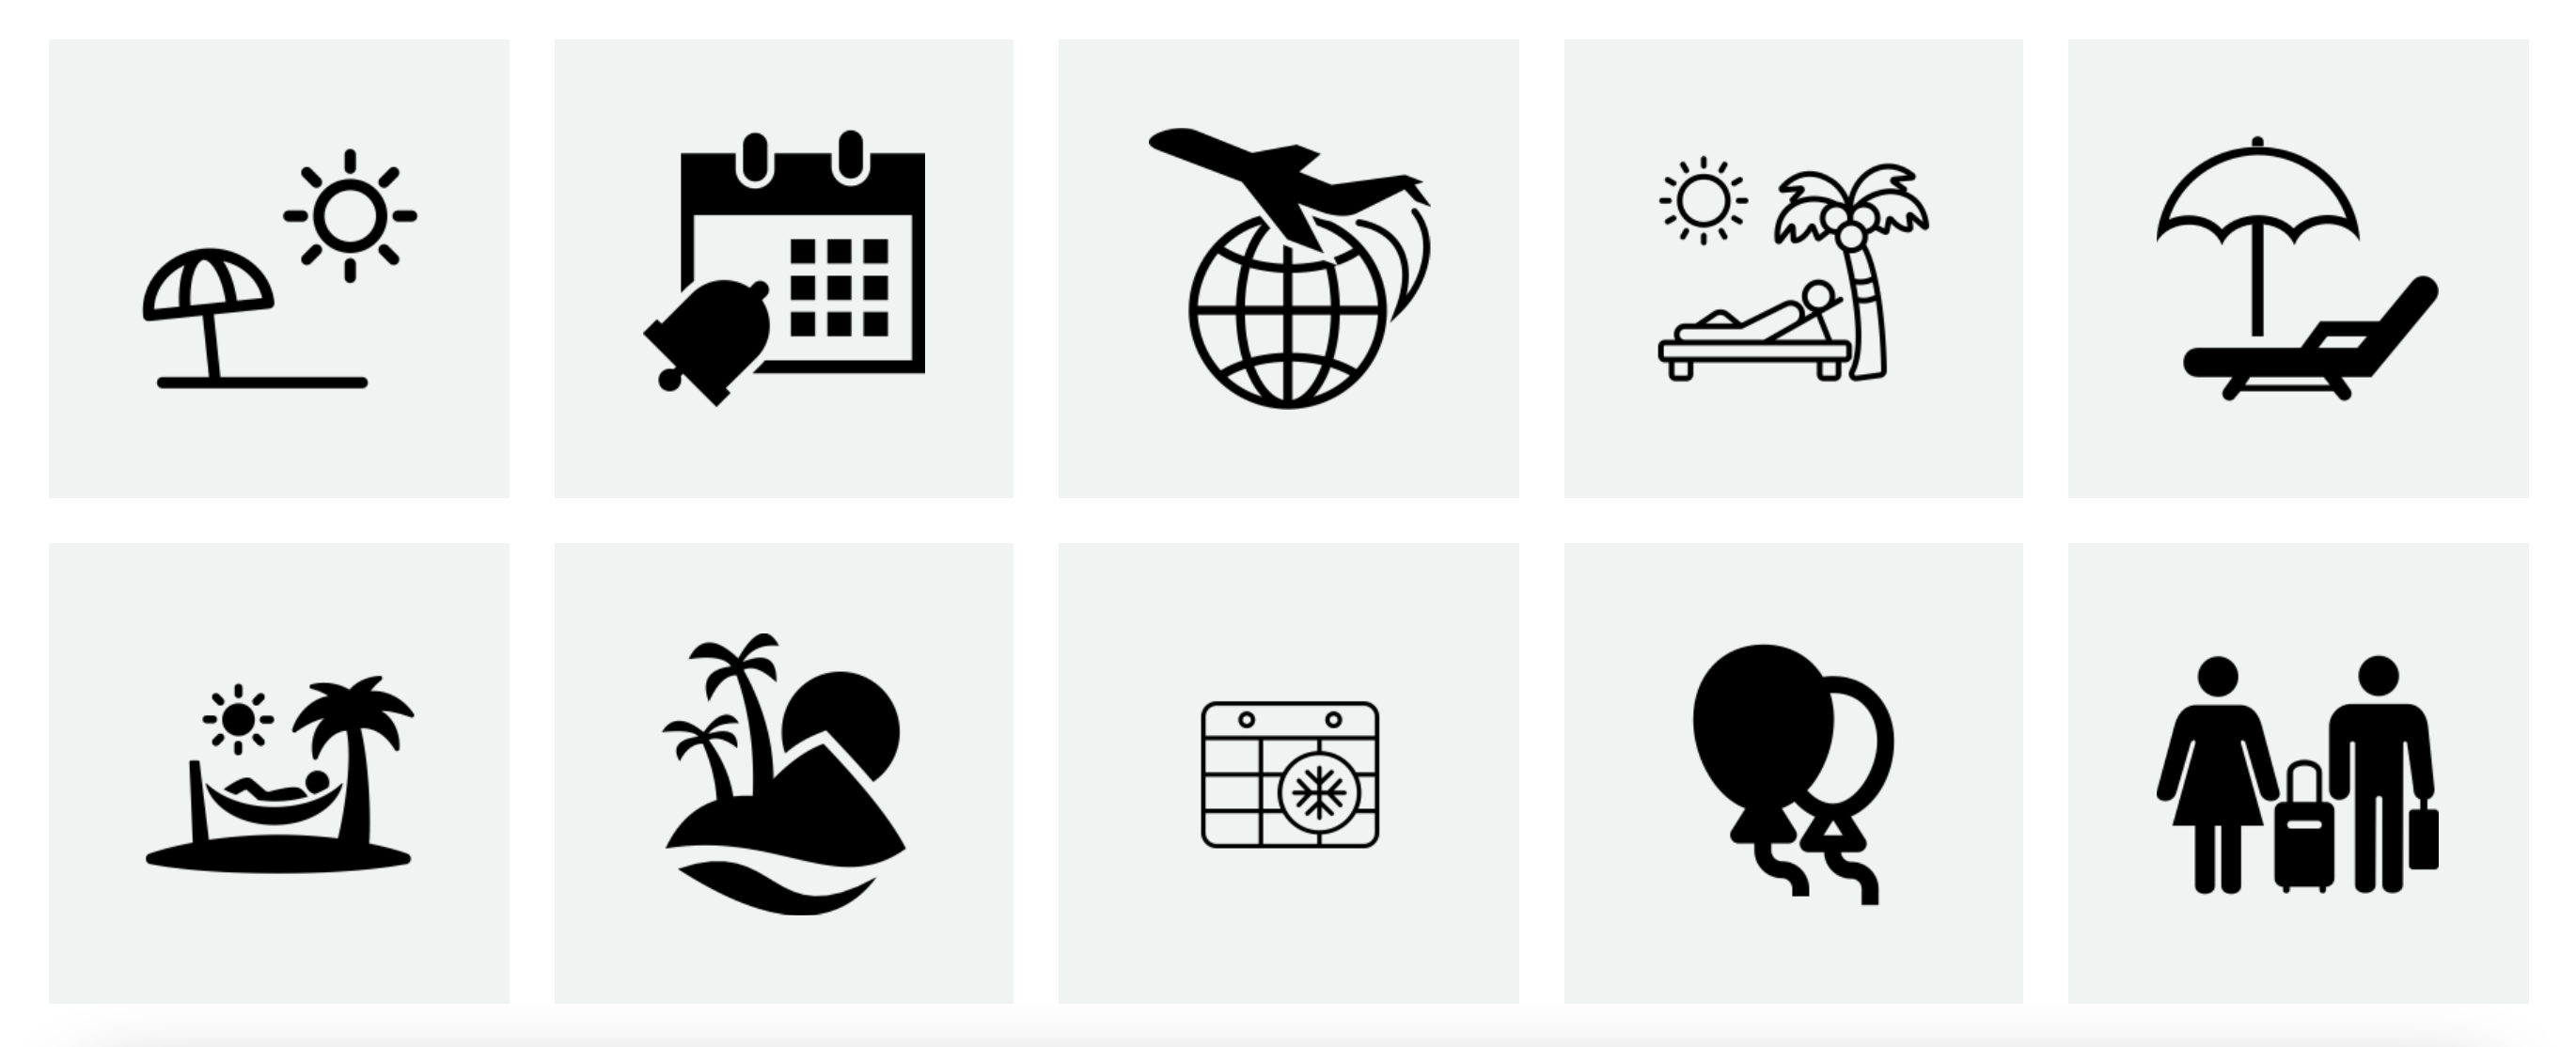 DIY Design: Finding great Icons